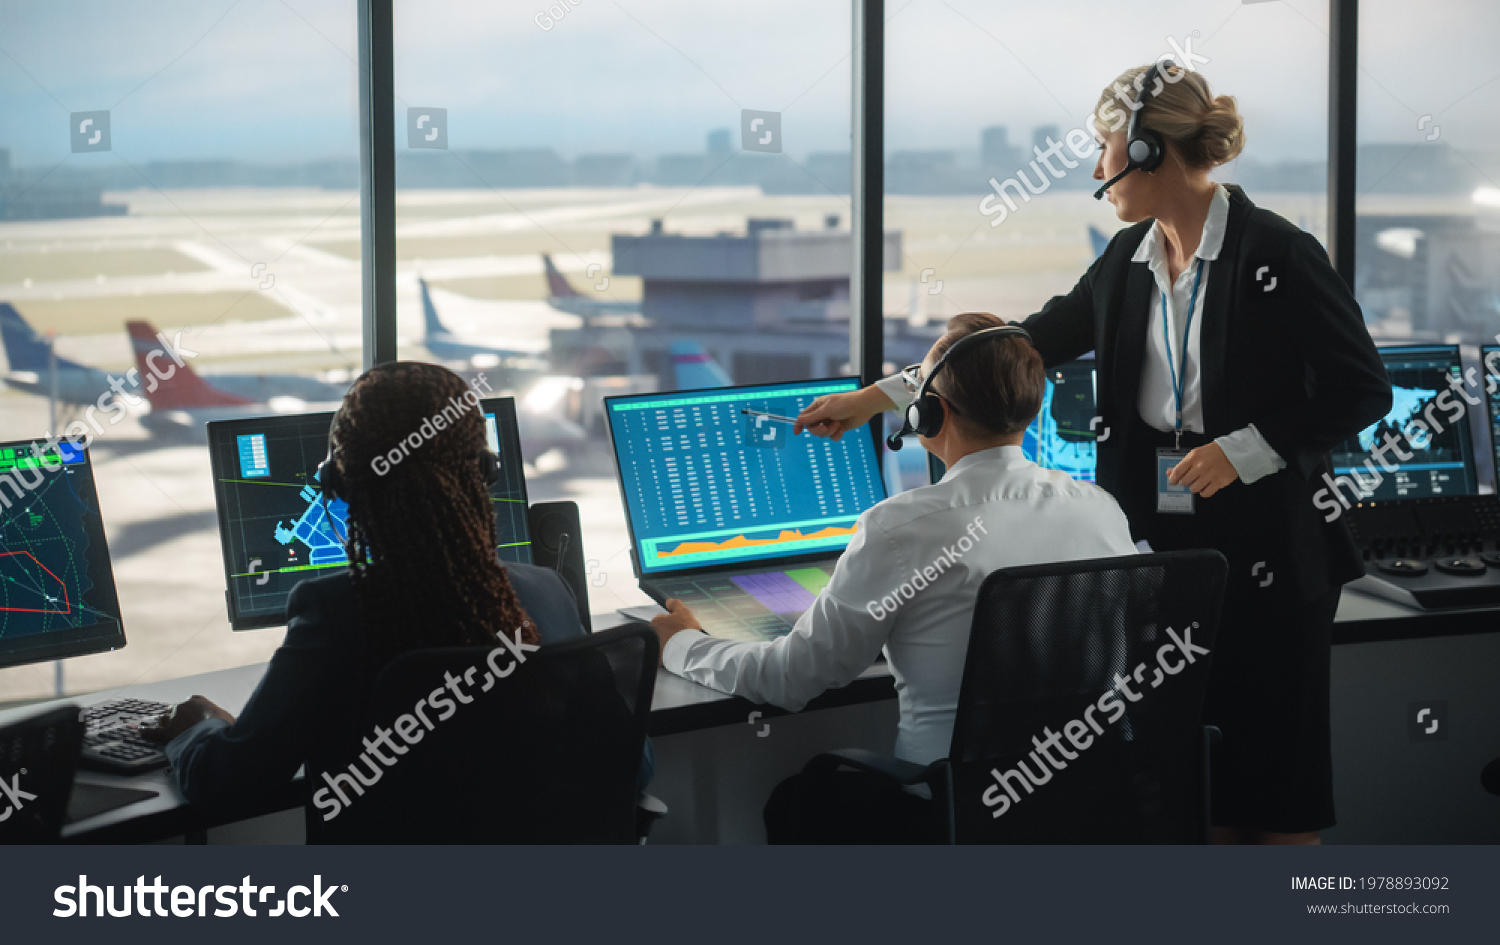 Female and Male Air Traffic Controllers with Headsets Talk in Airport Tower. Office Room is Full of Desktop Computer Displays with Navigation Screens, Airplane Departure and Arrival Data for the Team. #1978893092